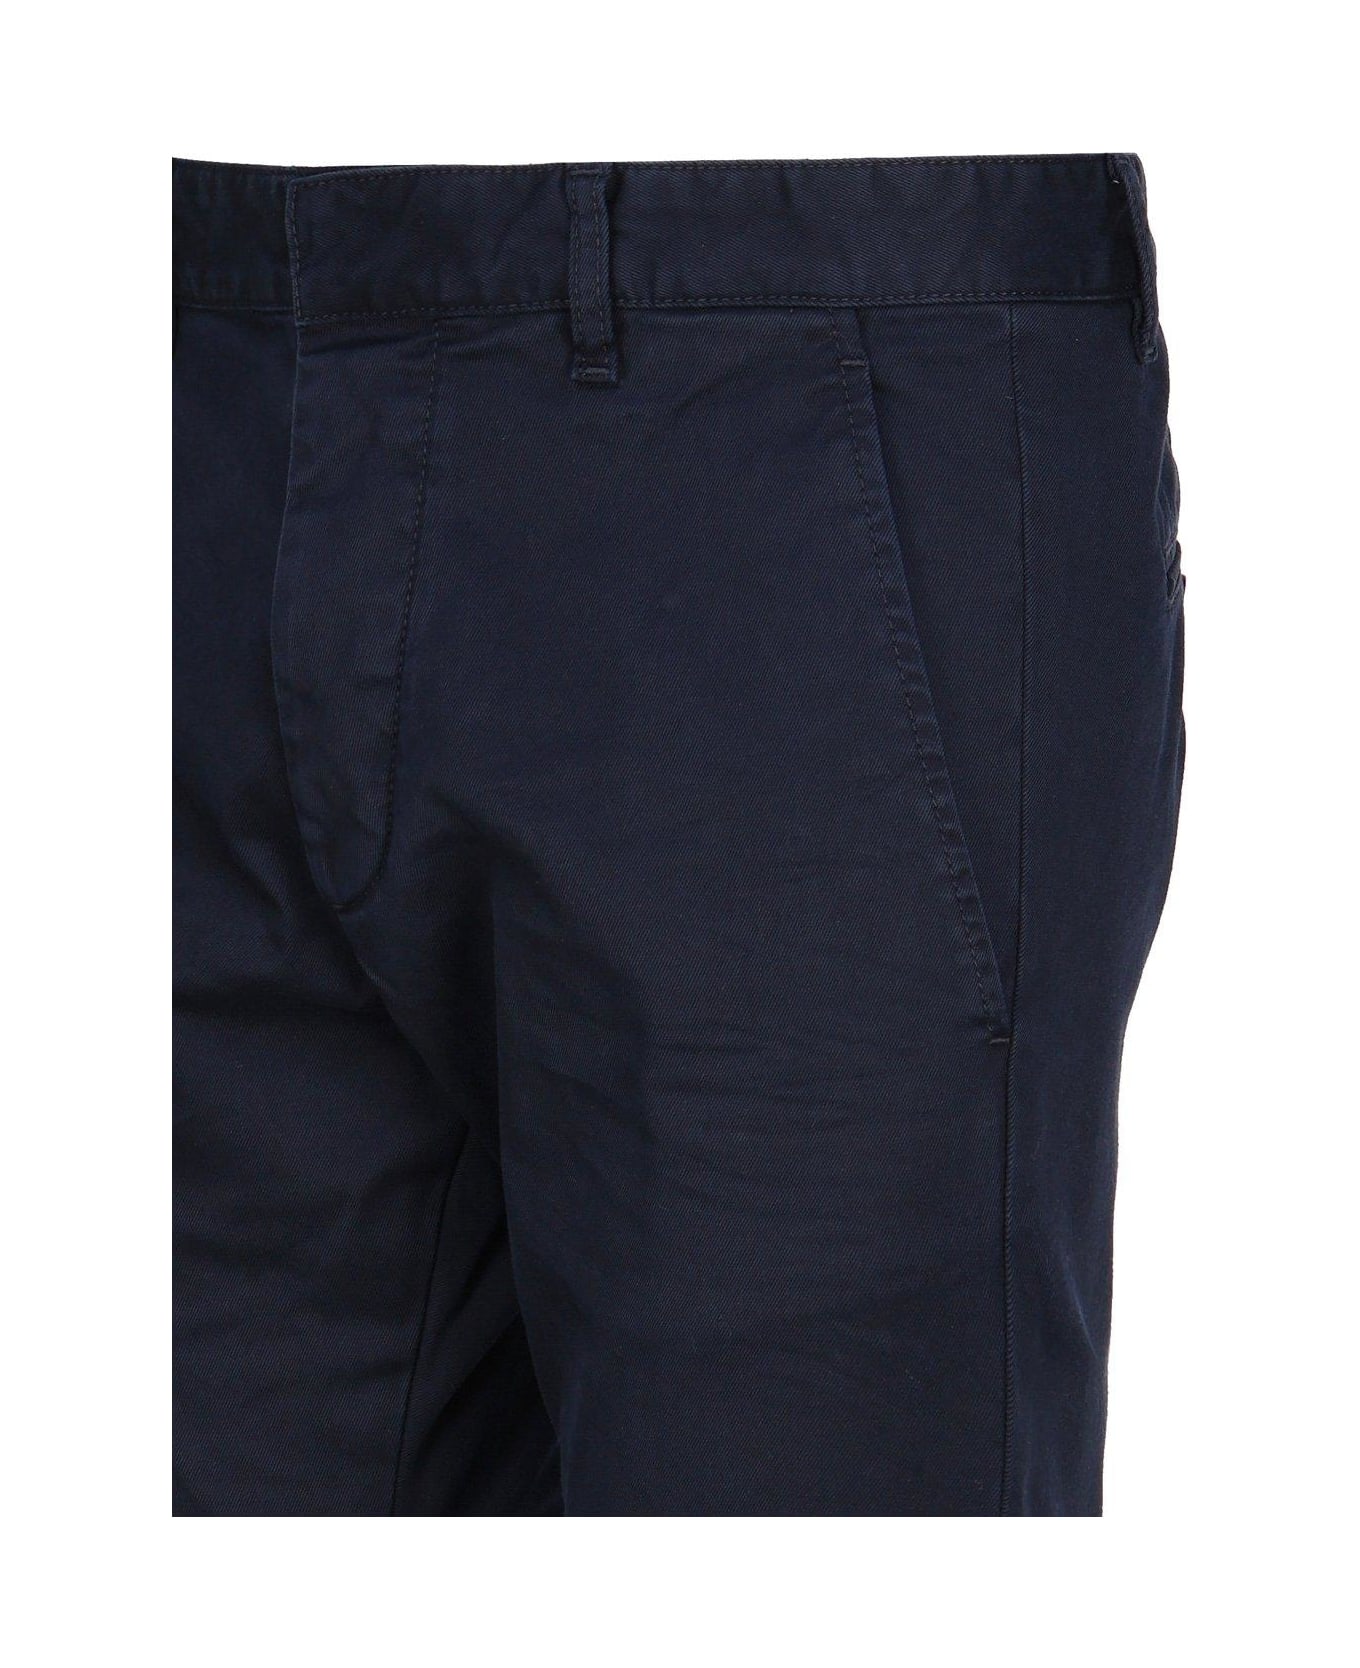 Dsquared2 Cool Guy Pant - Navy Blue ボトムス